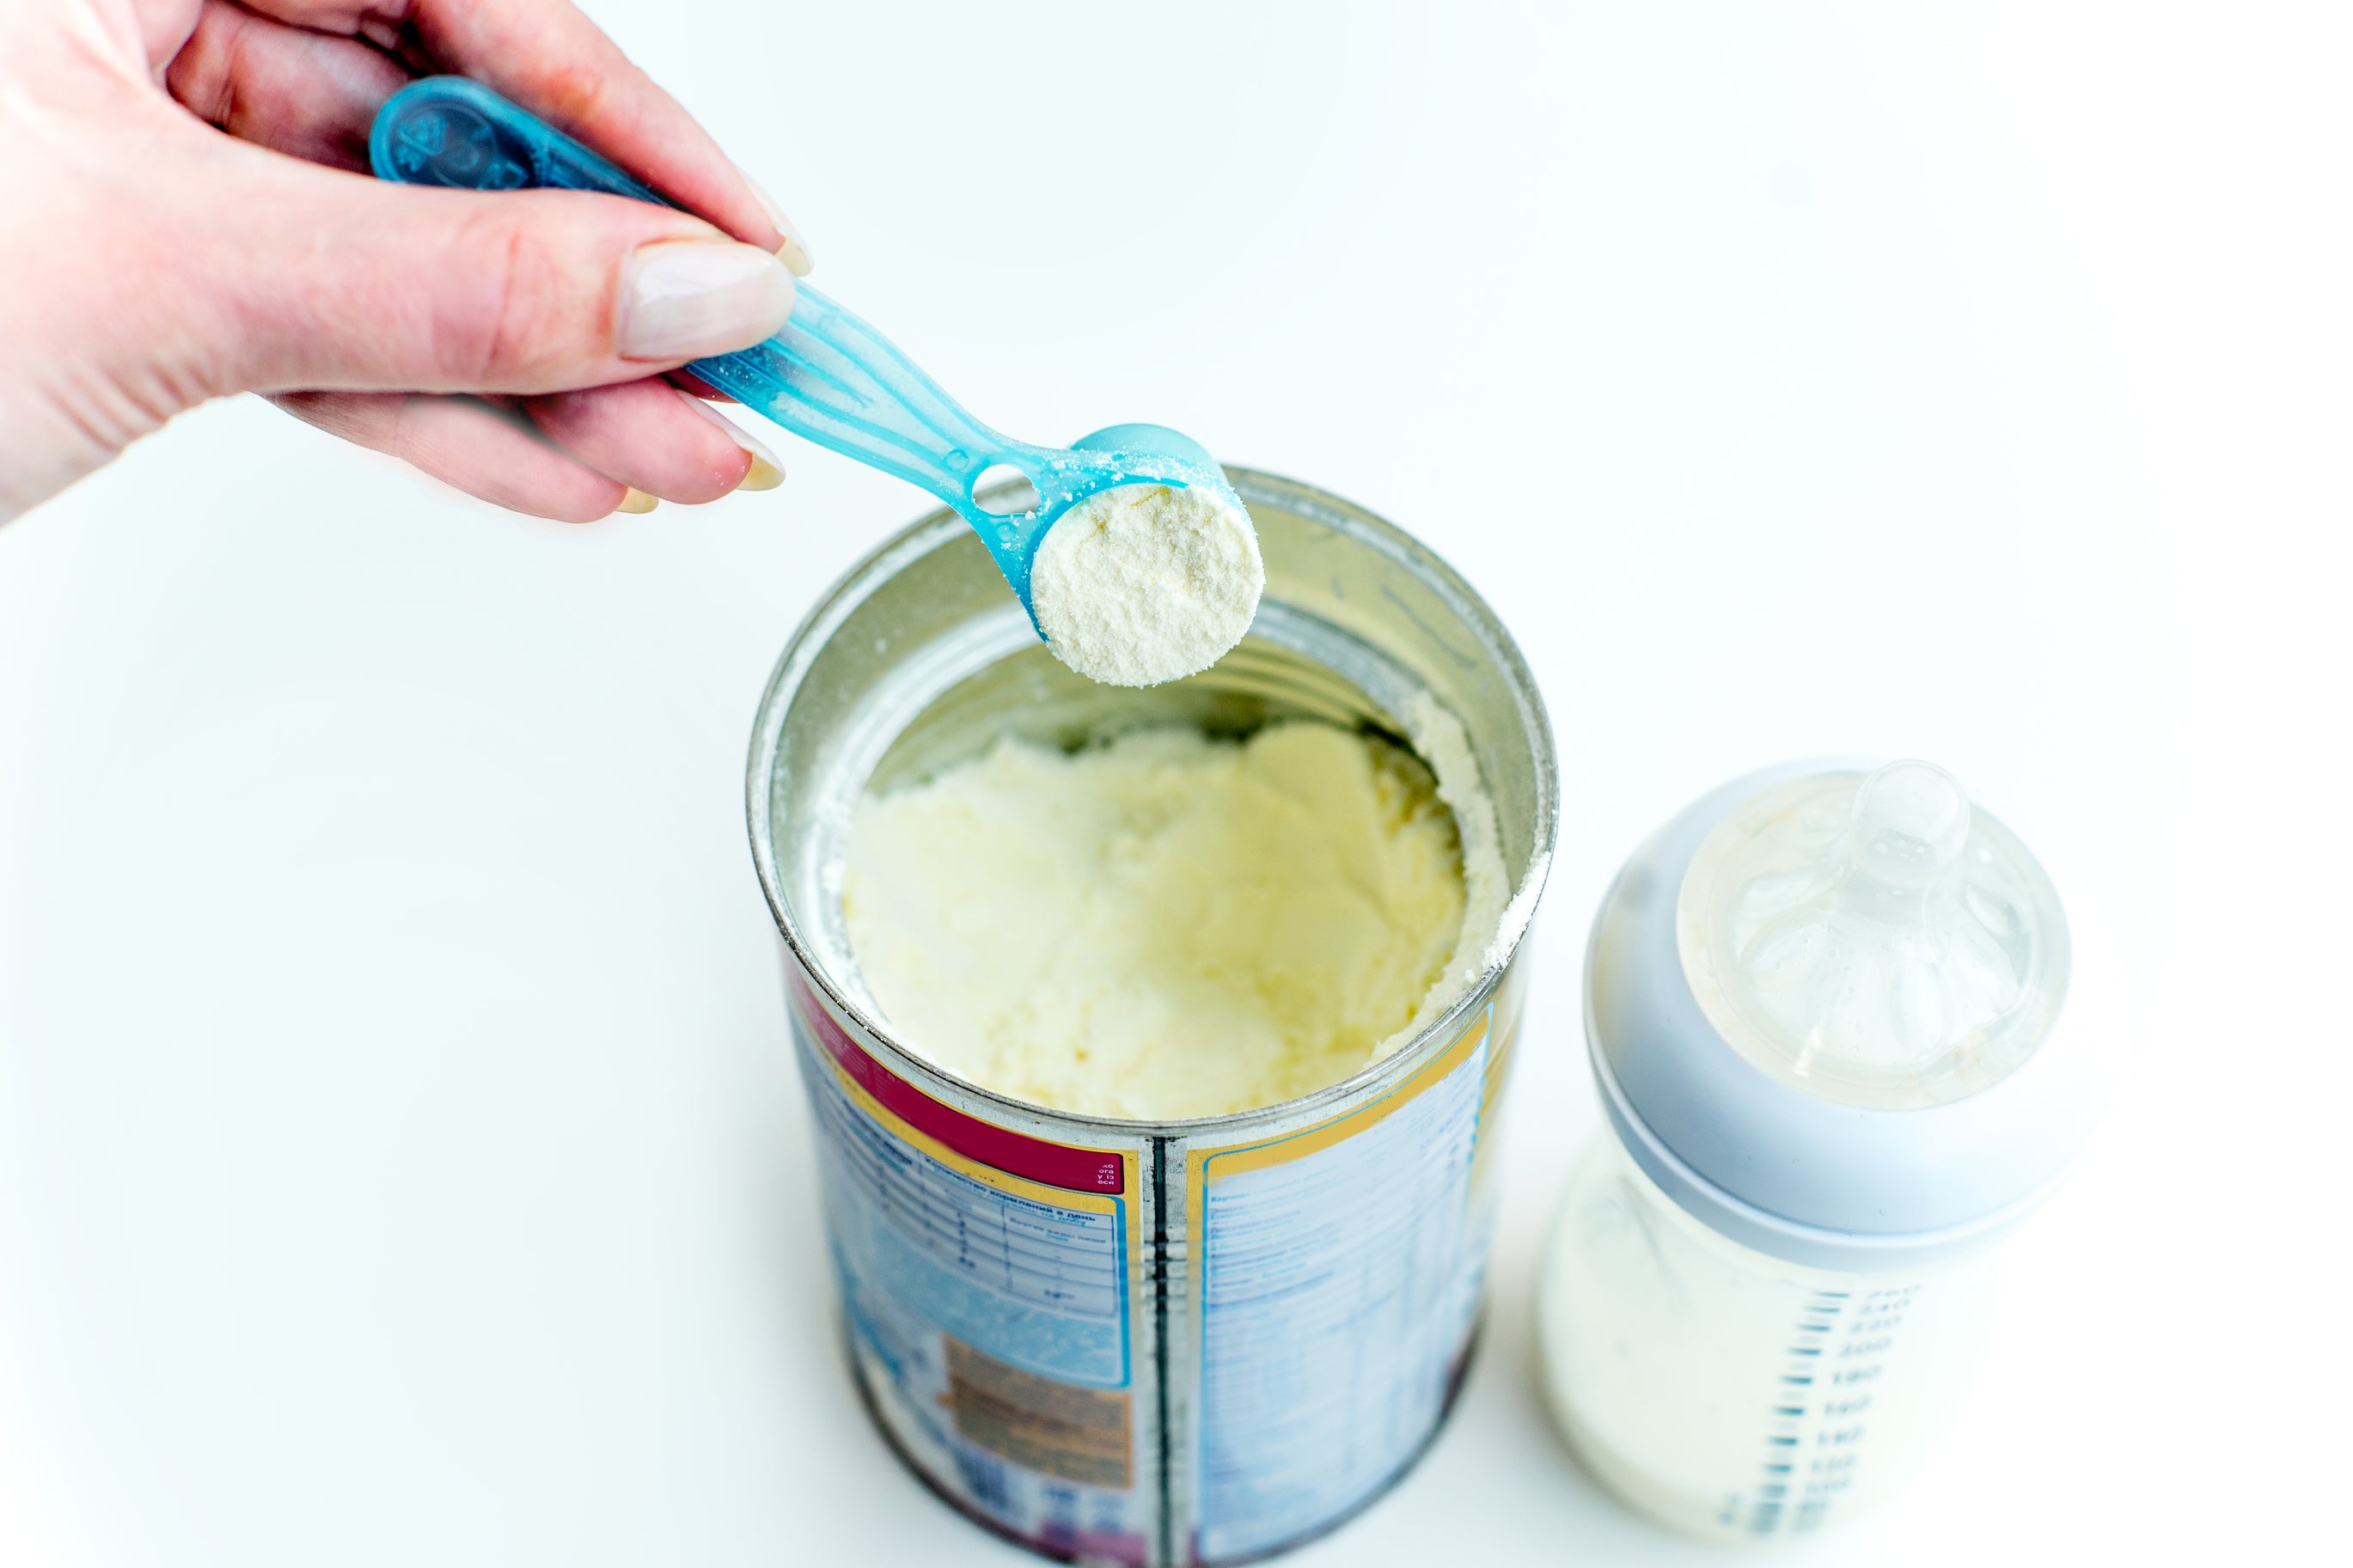 A hand holding a spoonful of baby formula over a can of baby formula and a feeding bottle. Once empty, you can repurpose the baby formula can and turn it into a pen stand, candle holder, or makeup stand!